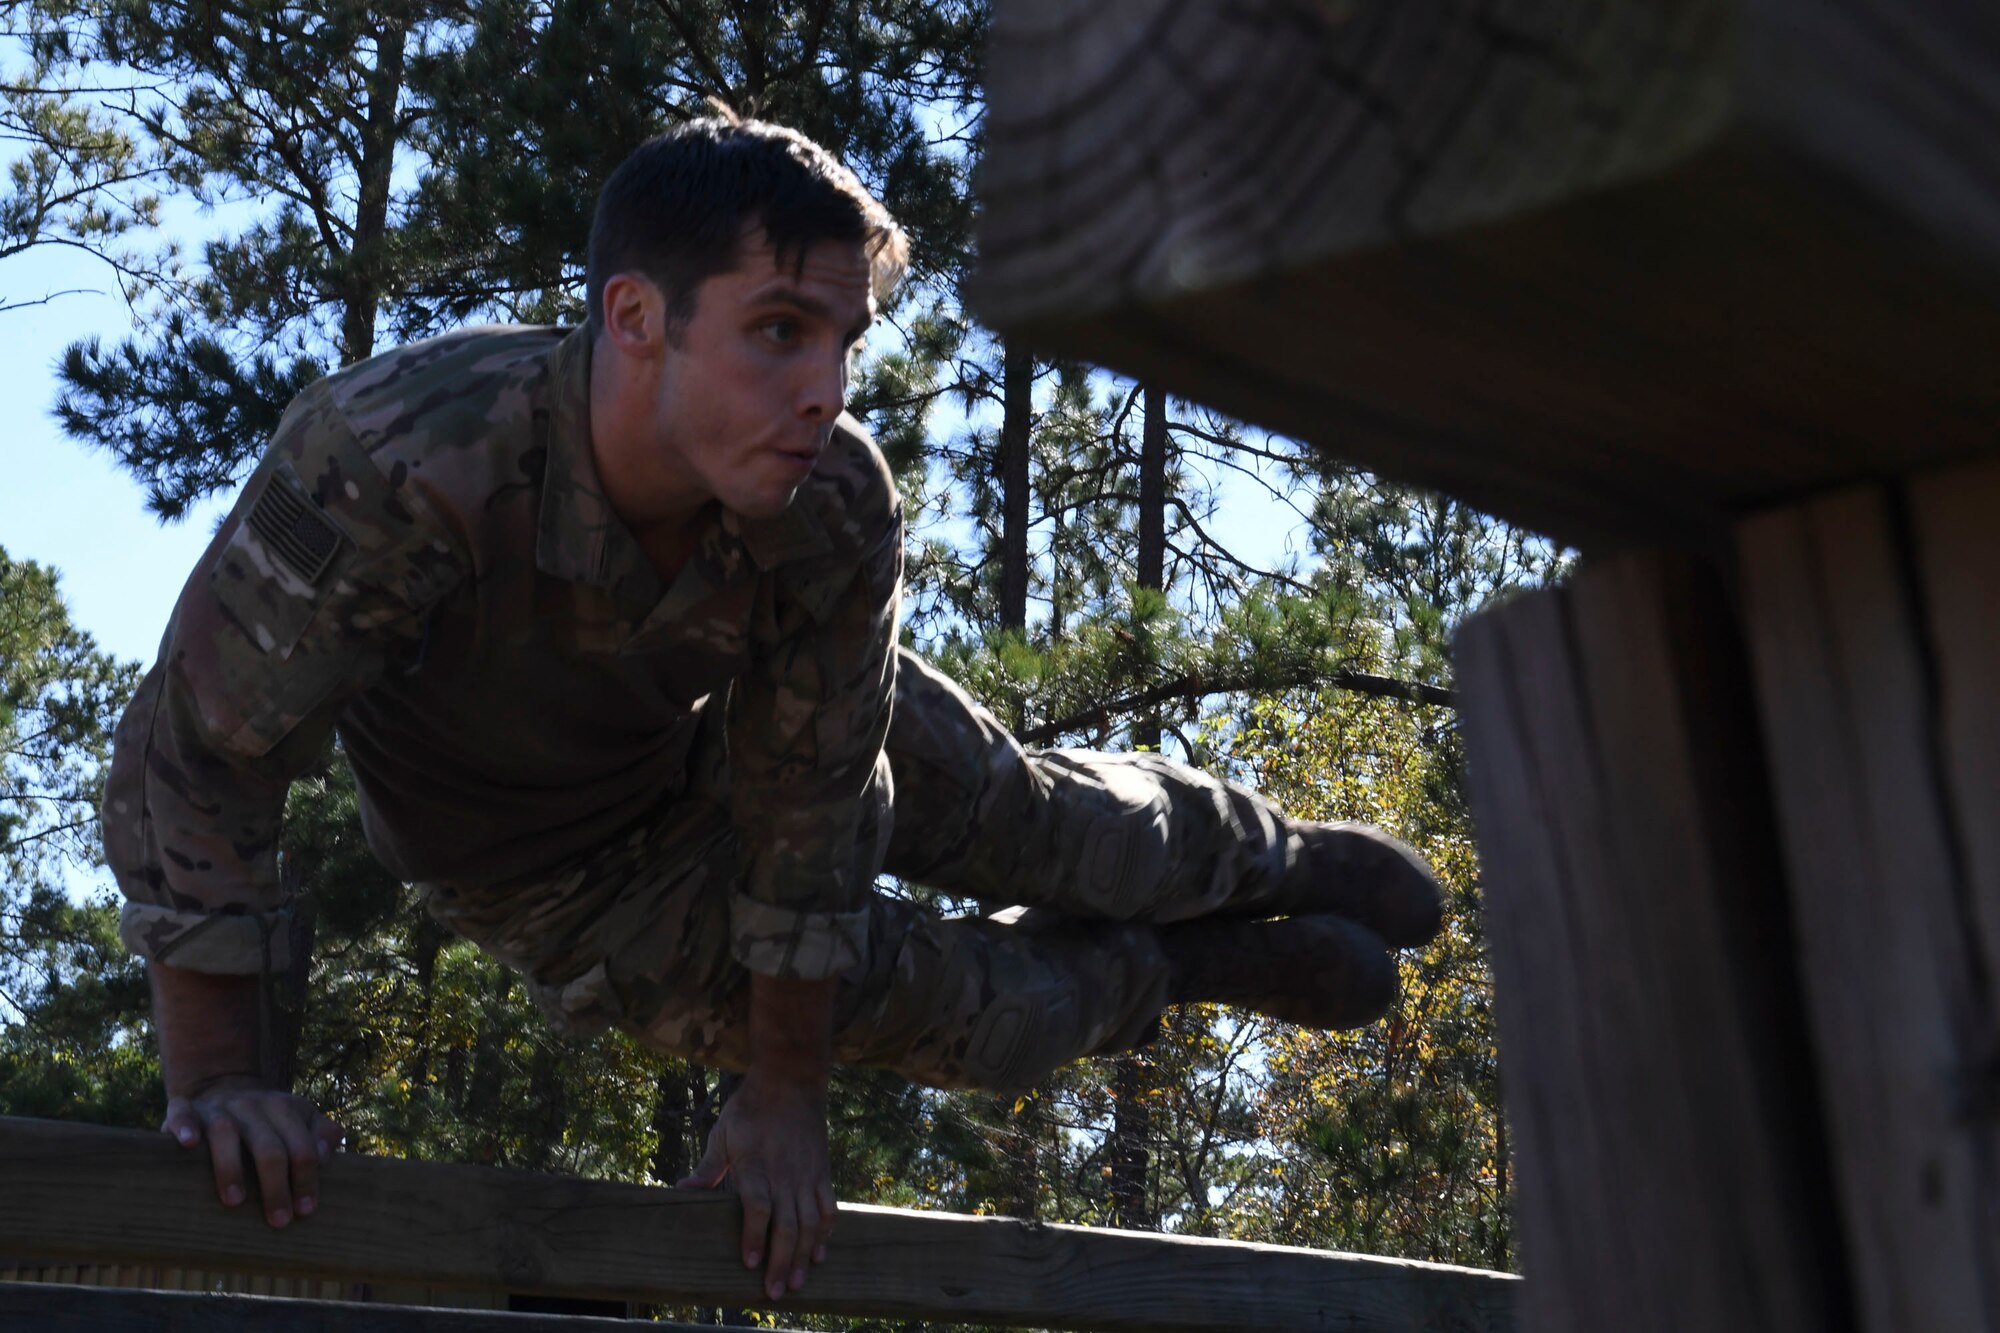 U.S. Air Force Staff Sgt. Benjamin Blake, a competitor from the 20th Air Support Operations Squadron, jumps over an obstacle during the Dragon Challenge 2018 at Fort Bragg, North Carolina Oct. 31, 2018. After the obstacle course, Dragon Challenge competitors took an Army knowledge test to see how well they understand the sister service they support. (U.S. Air Force photo by 1st Lt. Faith Brodkorb)